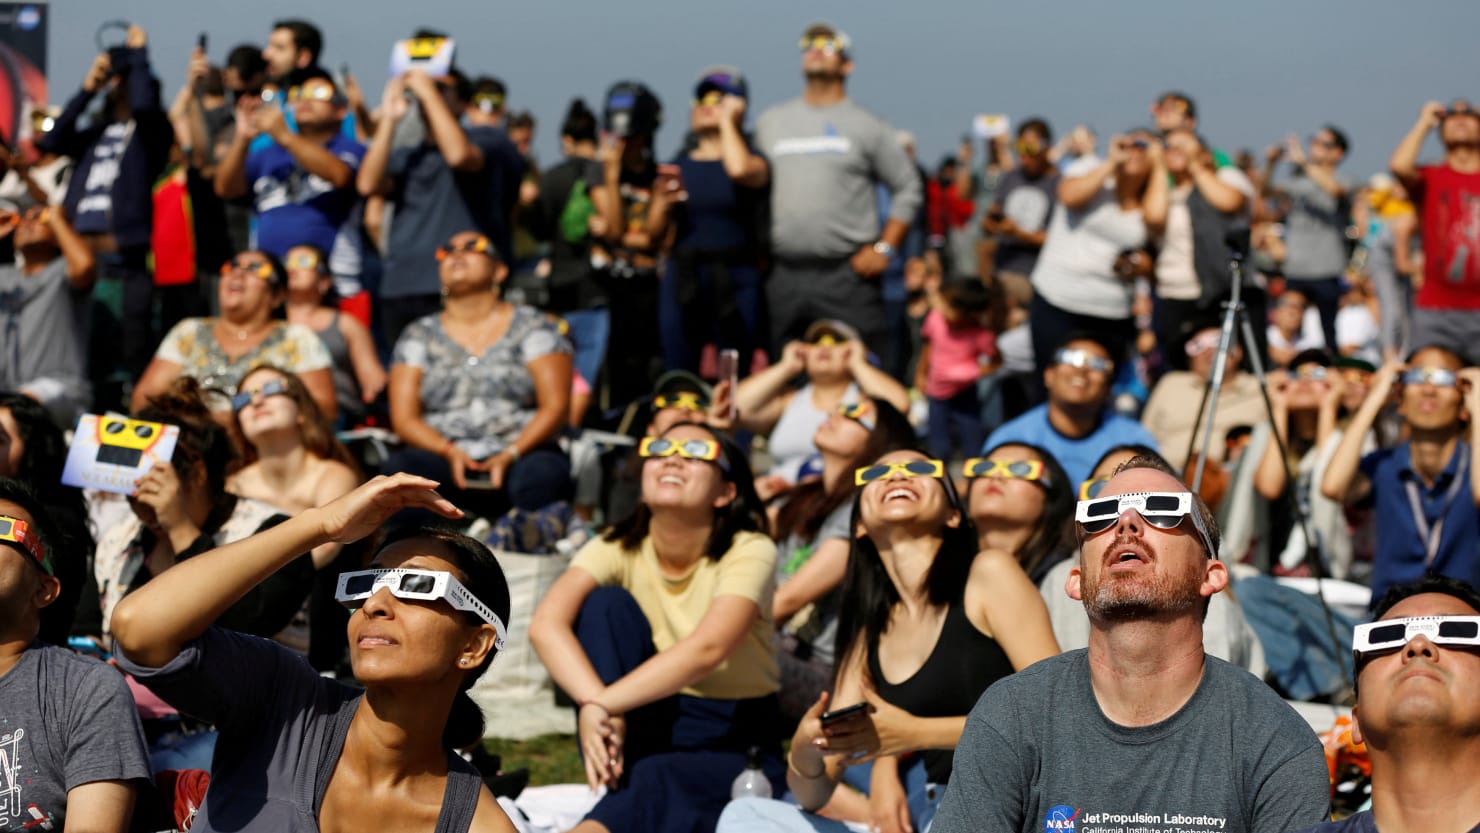 Eclipse Countdown Begins as Weather Threatens to Spoil the View DNyuz